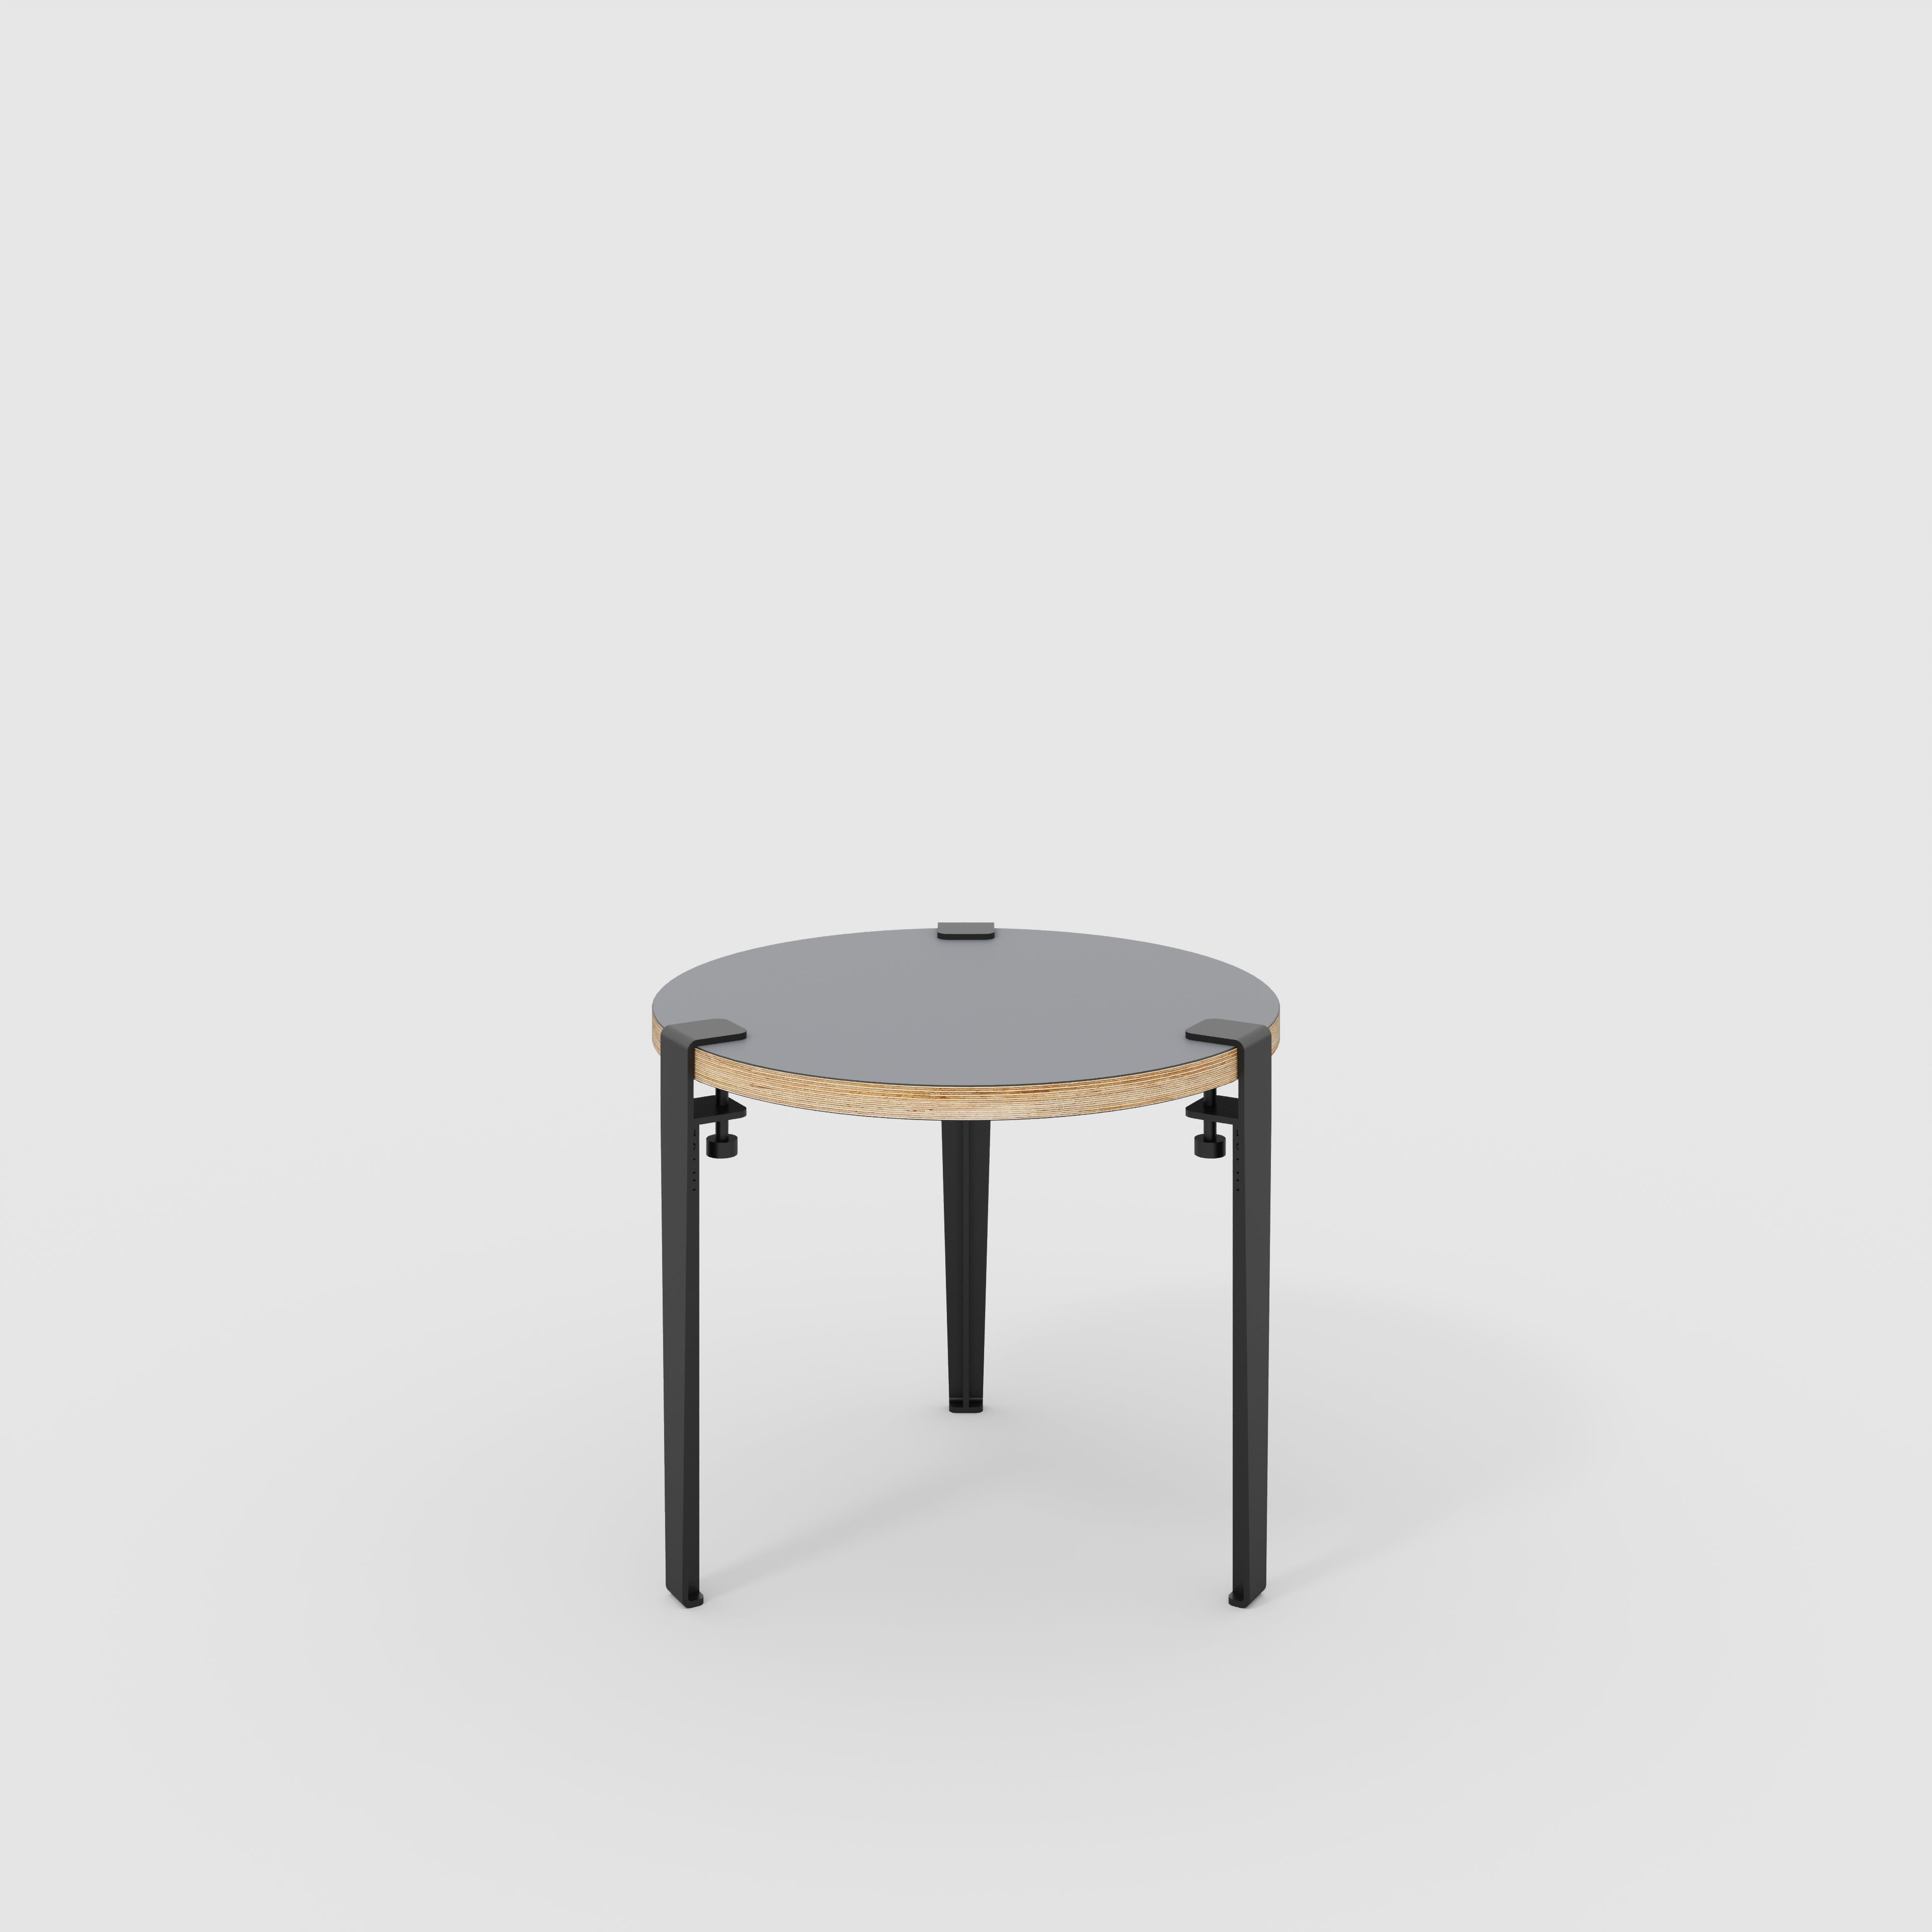 Round Side Table with Black Tiptoe Legs - Formica Tornado Grey - 500(dia) x 430(h)